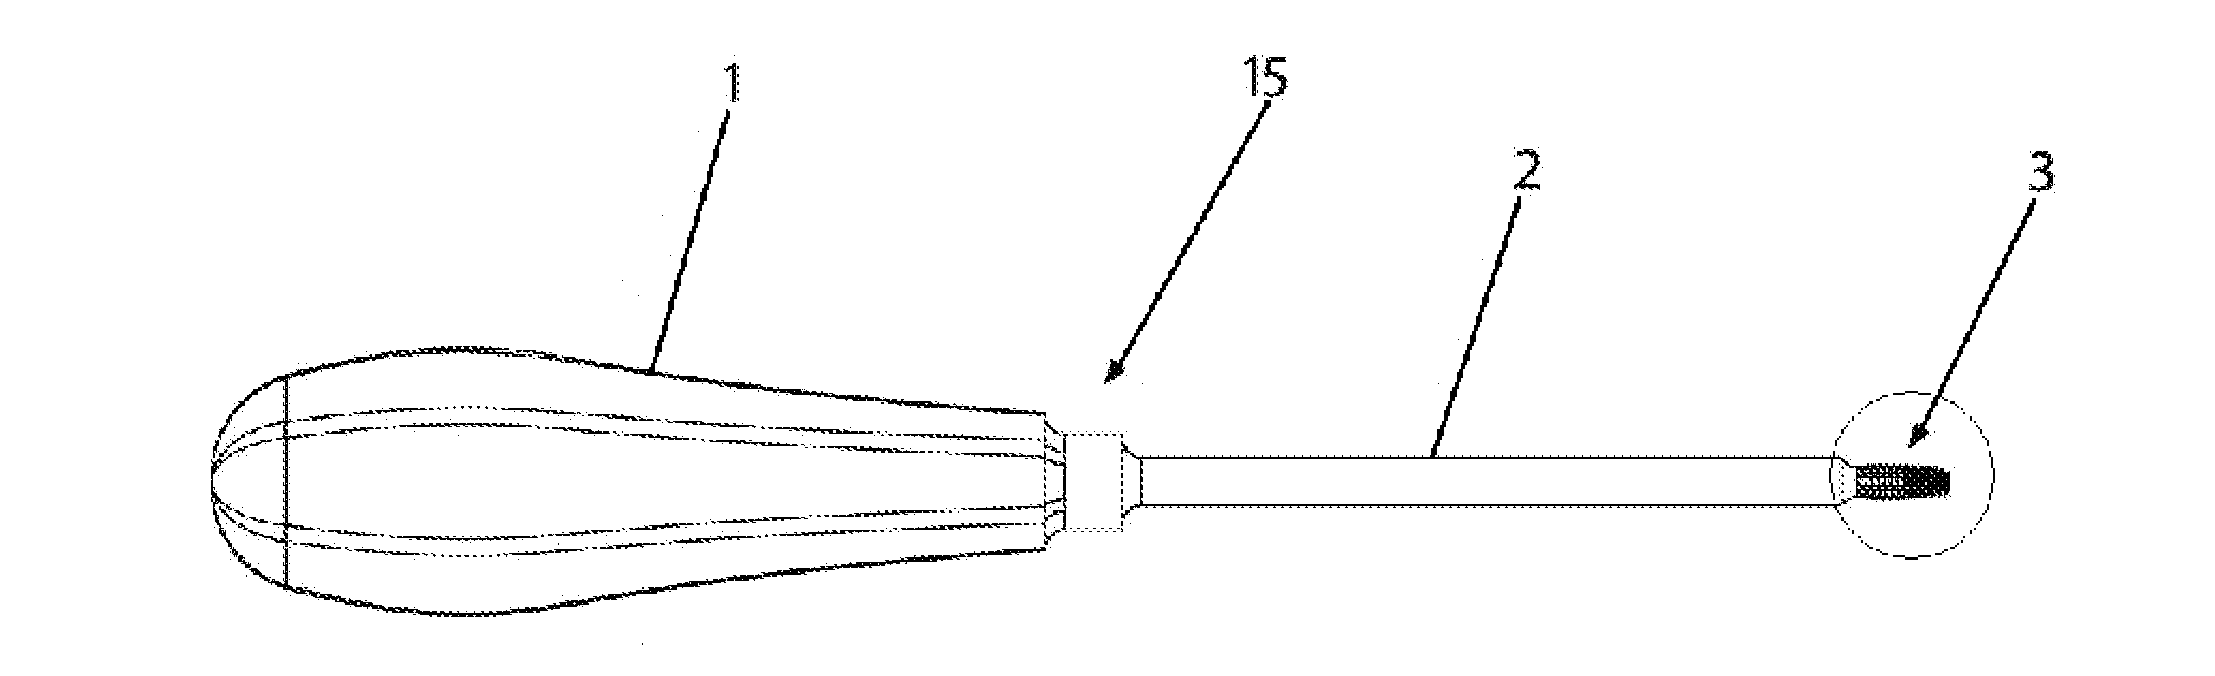 Device for loosening or extracting a wisdom tooth